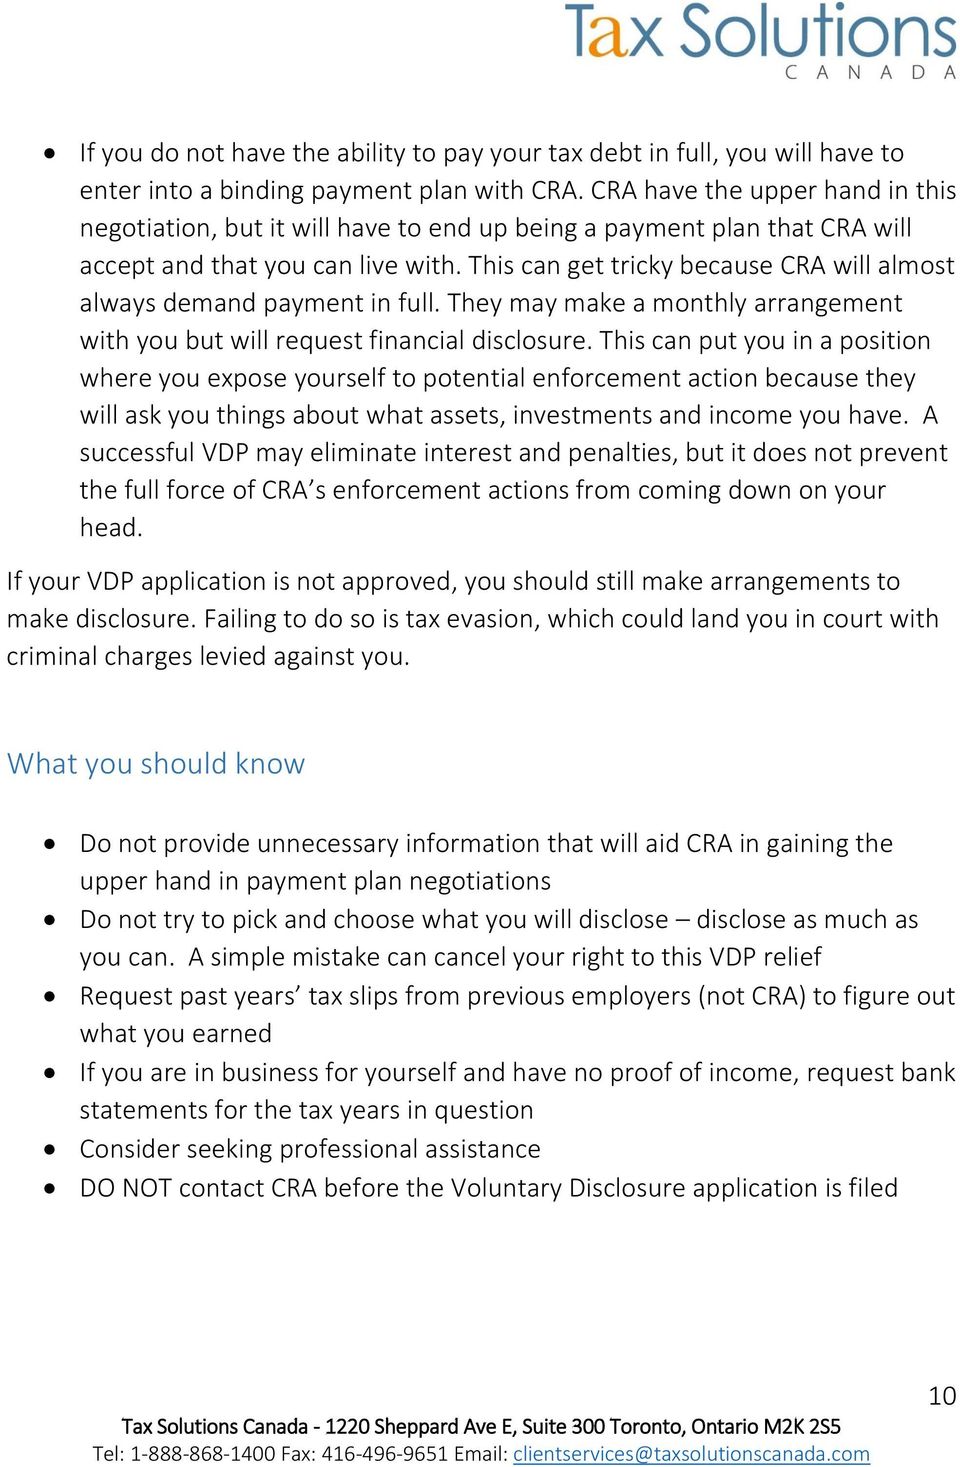 This can get tricky because CRA will almost always demand payment in full. They may make a monthly arrangement with you but will request financial disclosure.